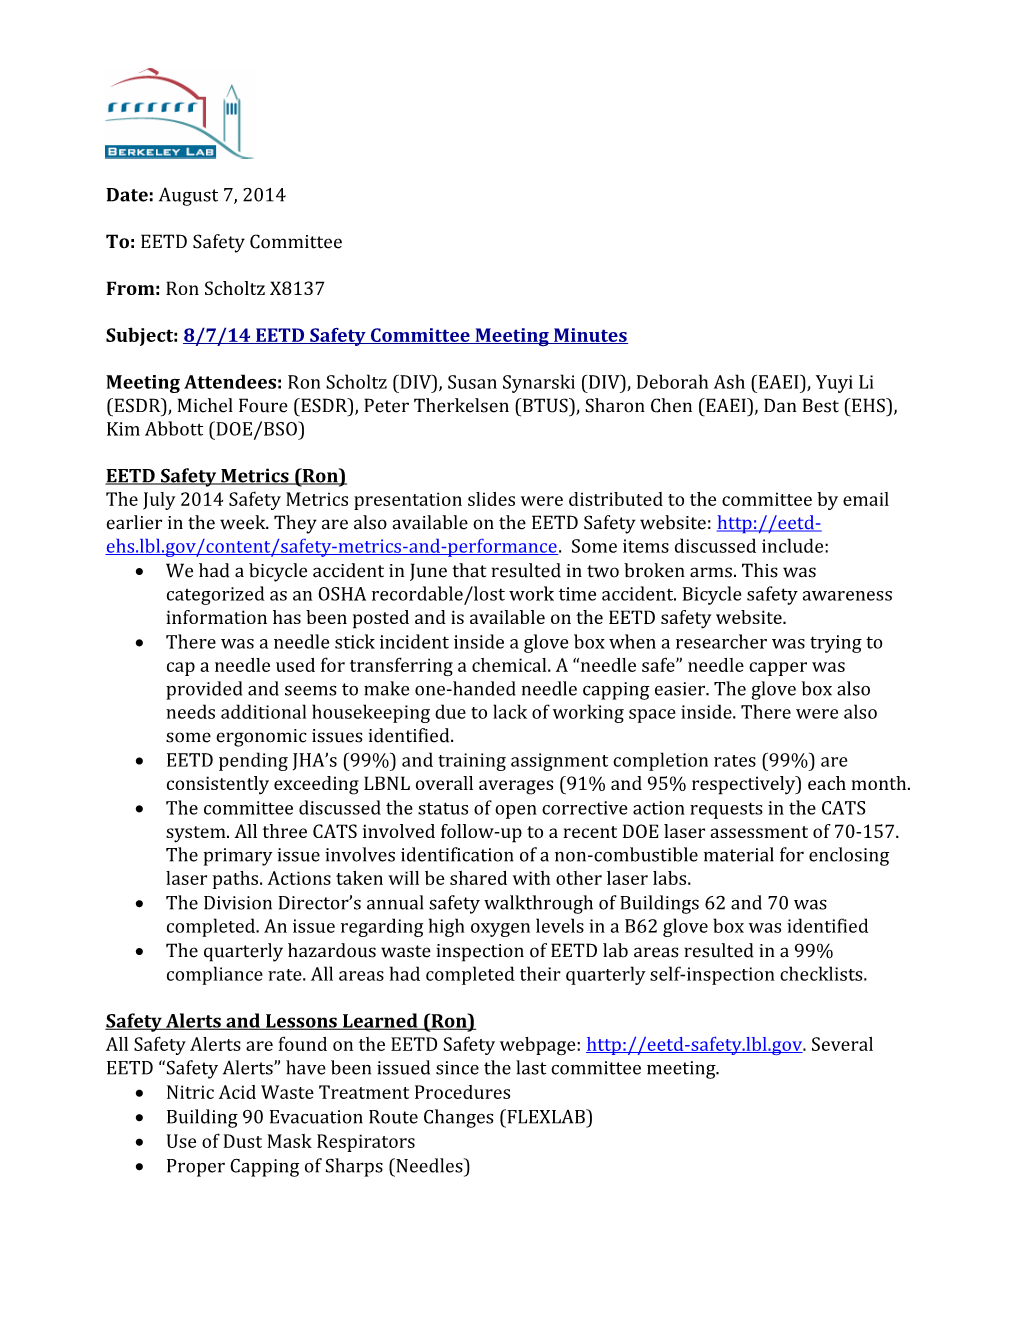 Subject: 8/7/14 EETD Safety Committee Meeting Minutes